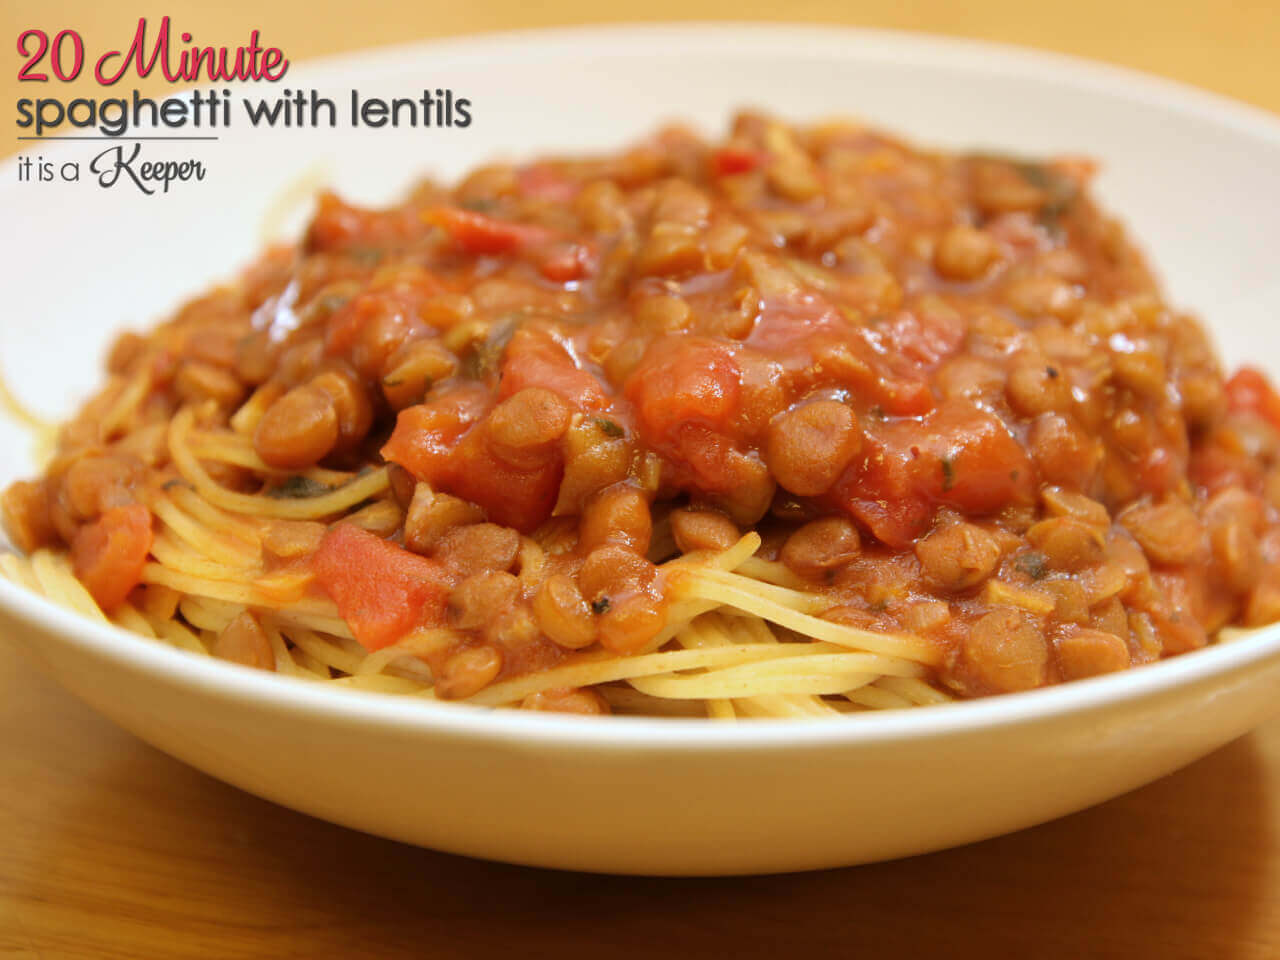 Spaghetti with Lentils - this easy recipe is ready in 20 minutes. In a white browl.